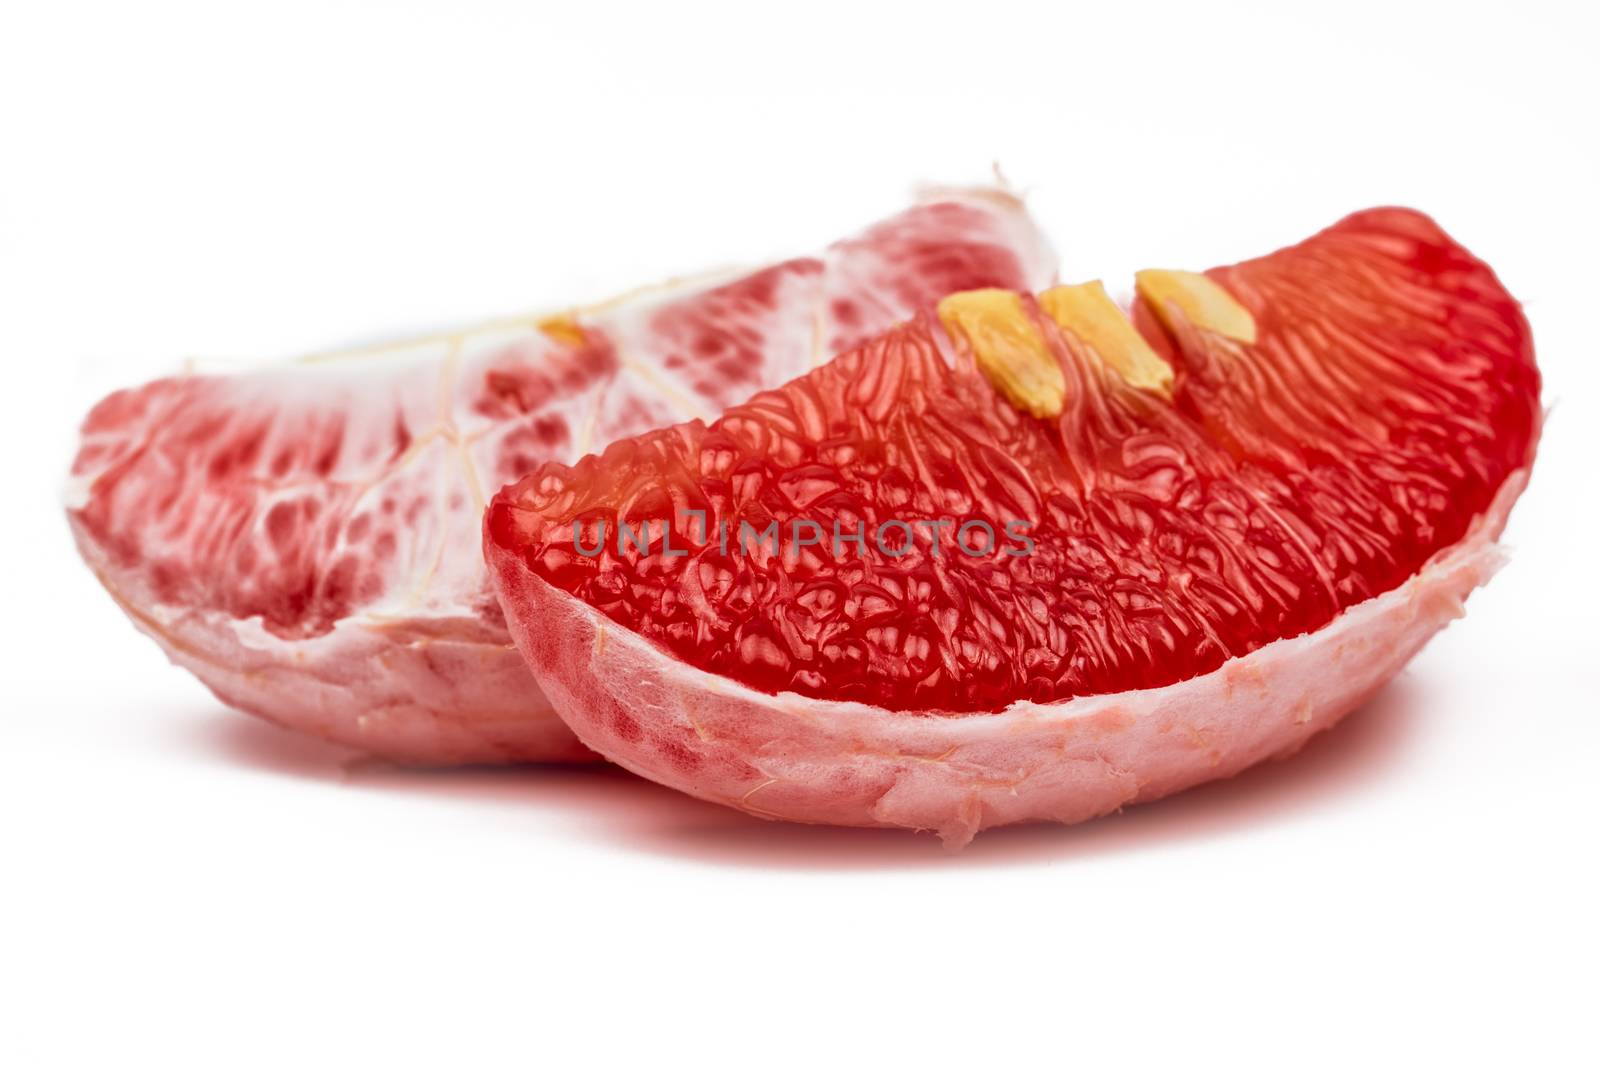 Red pomelo pulp with seeds isolated on white background. Thailand Siam ruby pomelo fruit. Natural source of vitamin C (antioxidants) and potassium. Healthy food for slow down aging